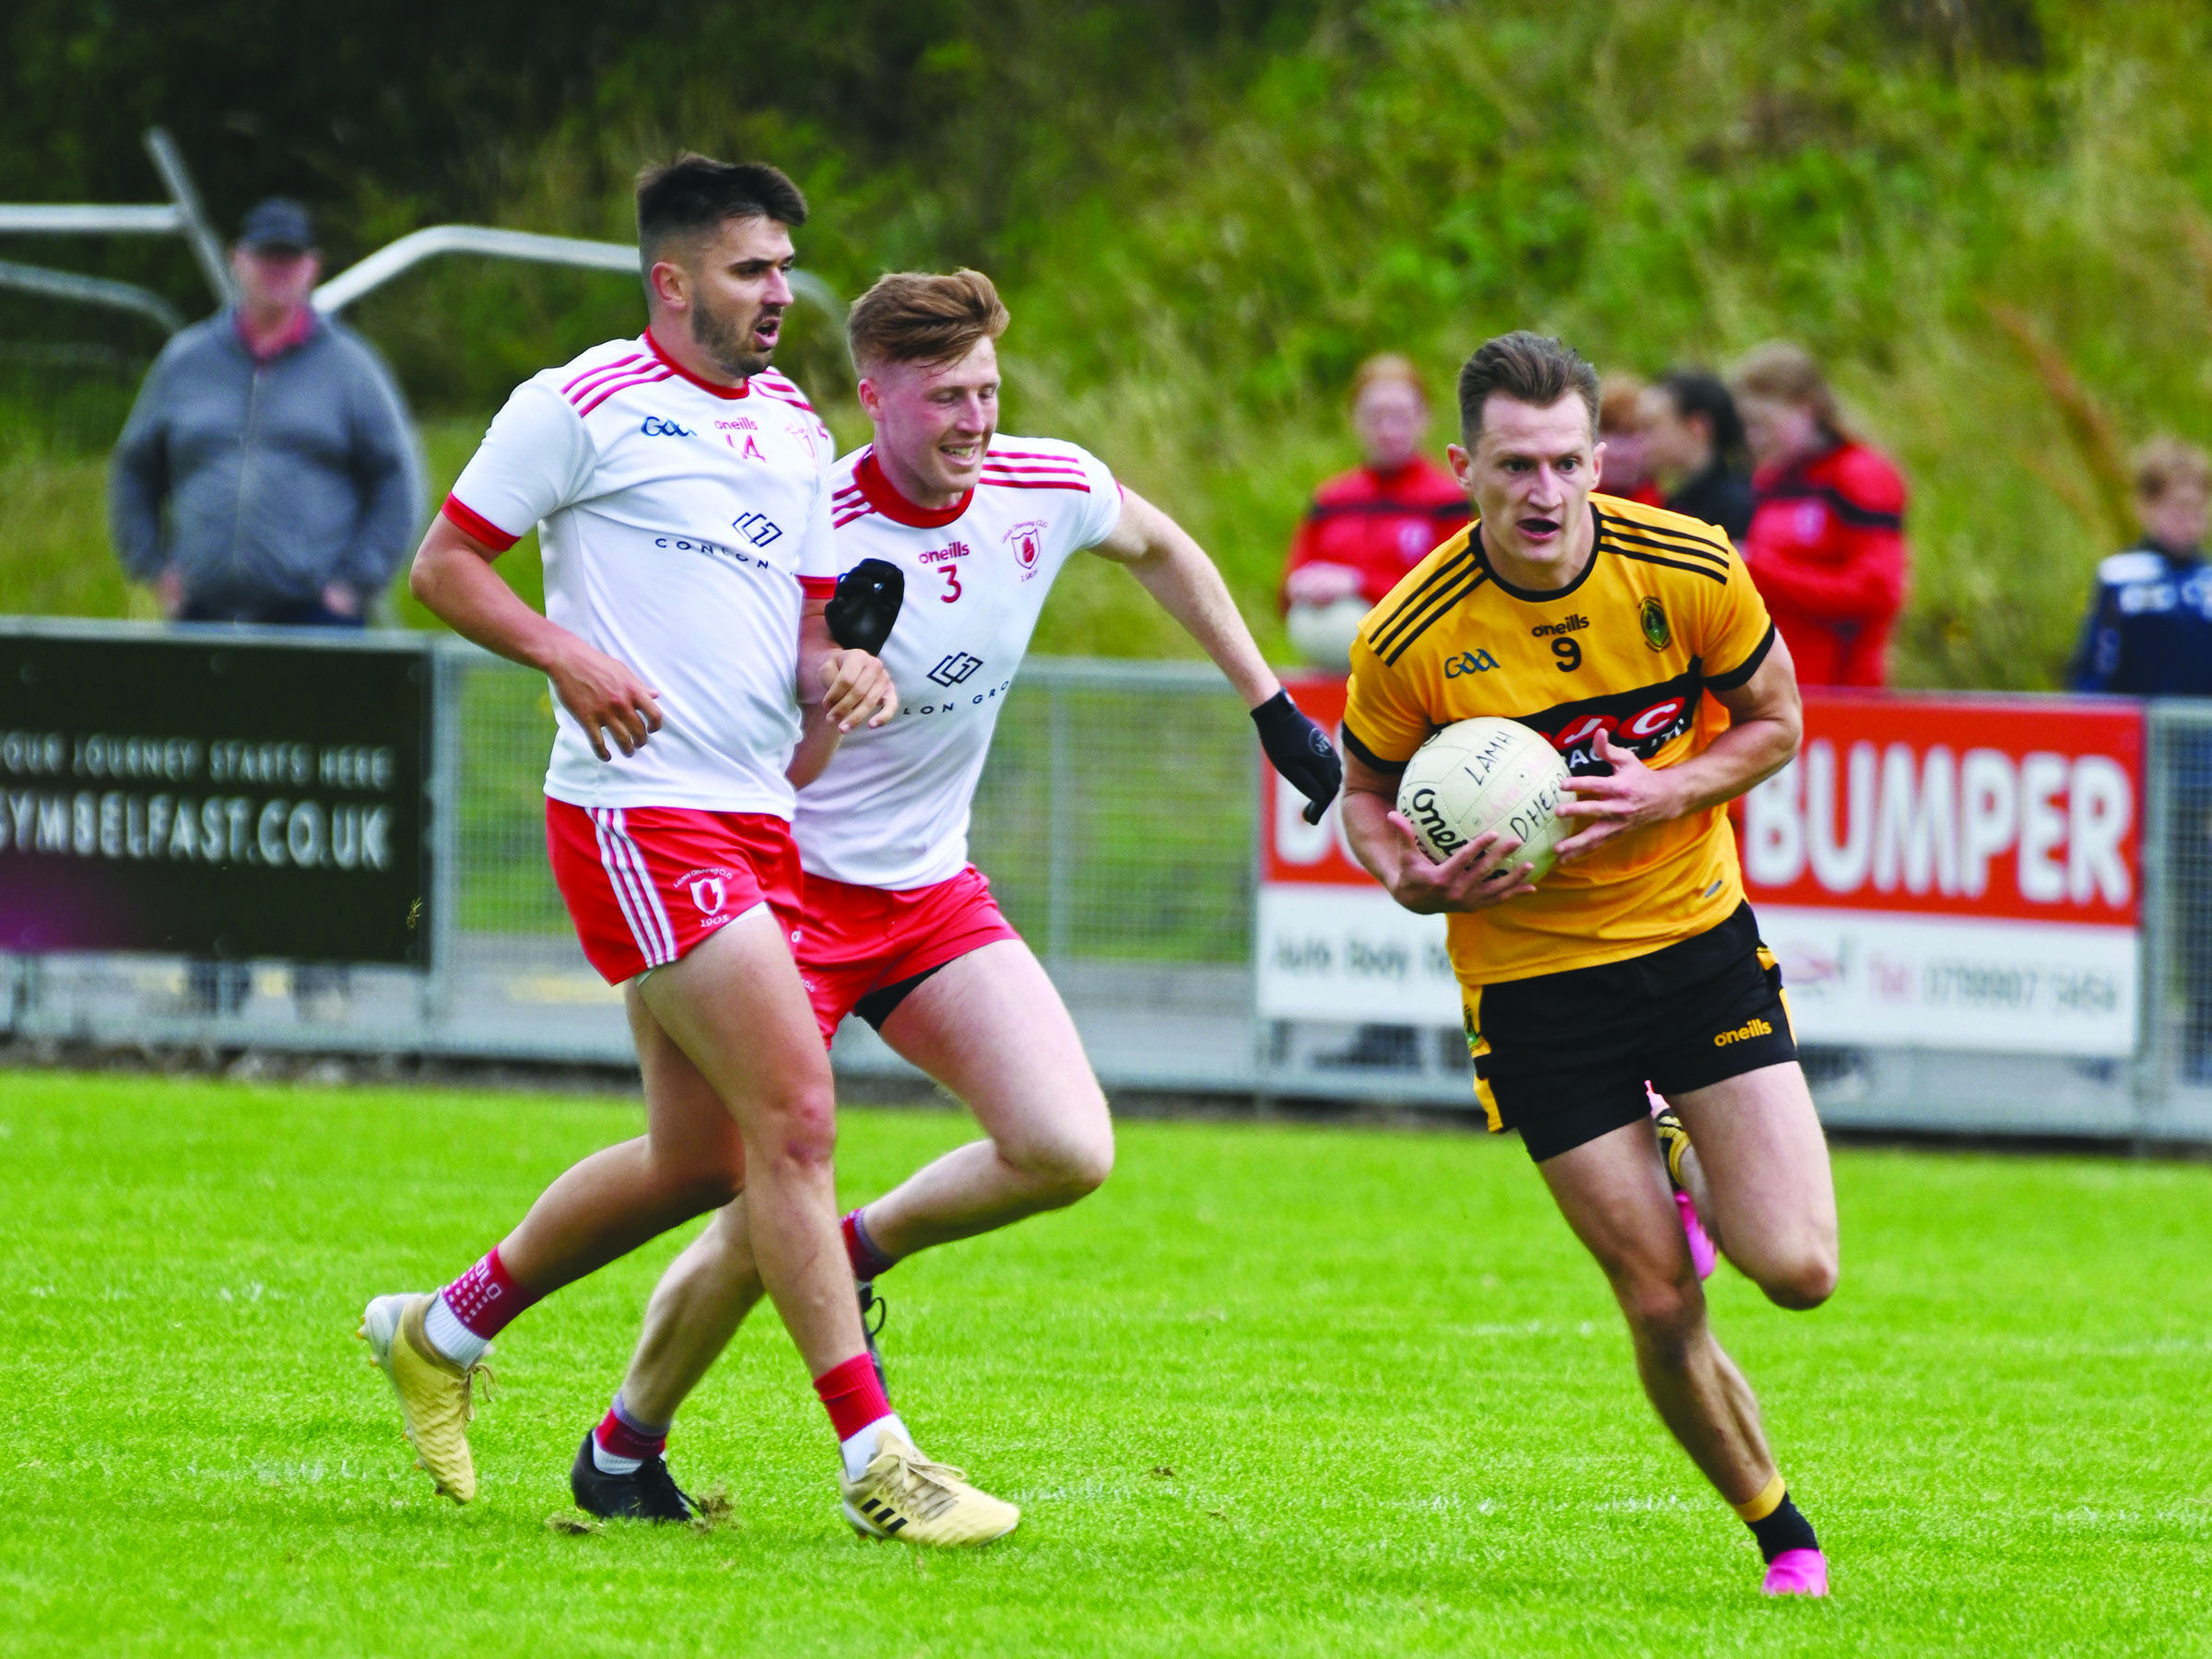 Naomh Éanna got the better of Lámh Dhearg at Hightown last month, but the winner of Sunday’s return fixture at Hannahstown will be in pole position to secure a top-two finish in Group Three and a quarter-final berth in the Senior Football Championship